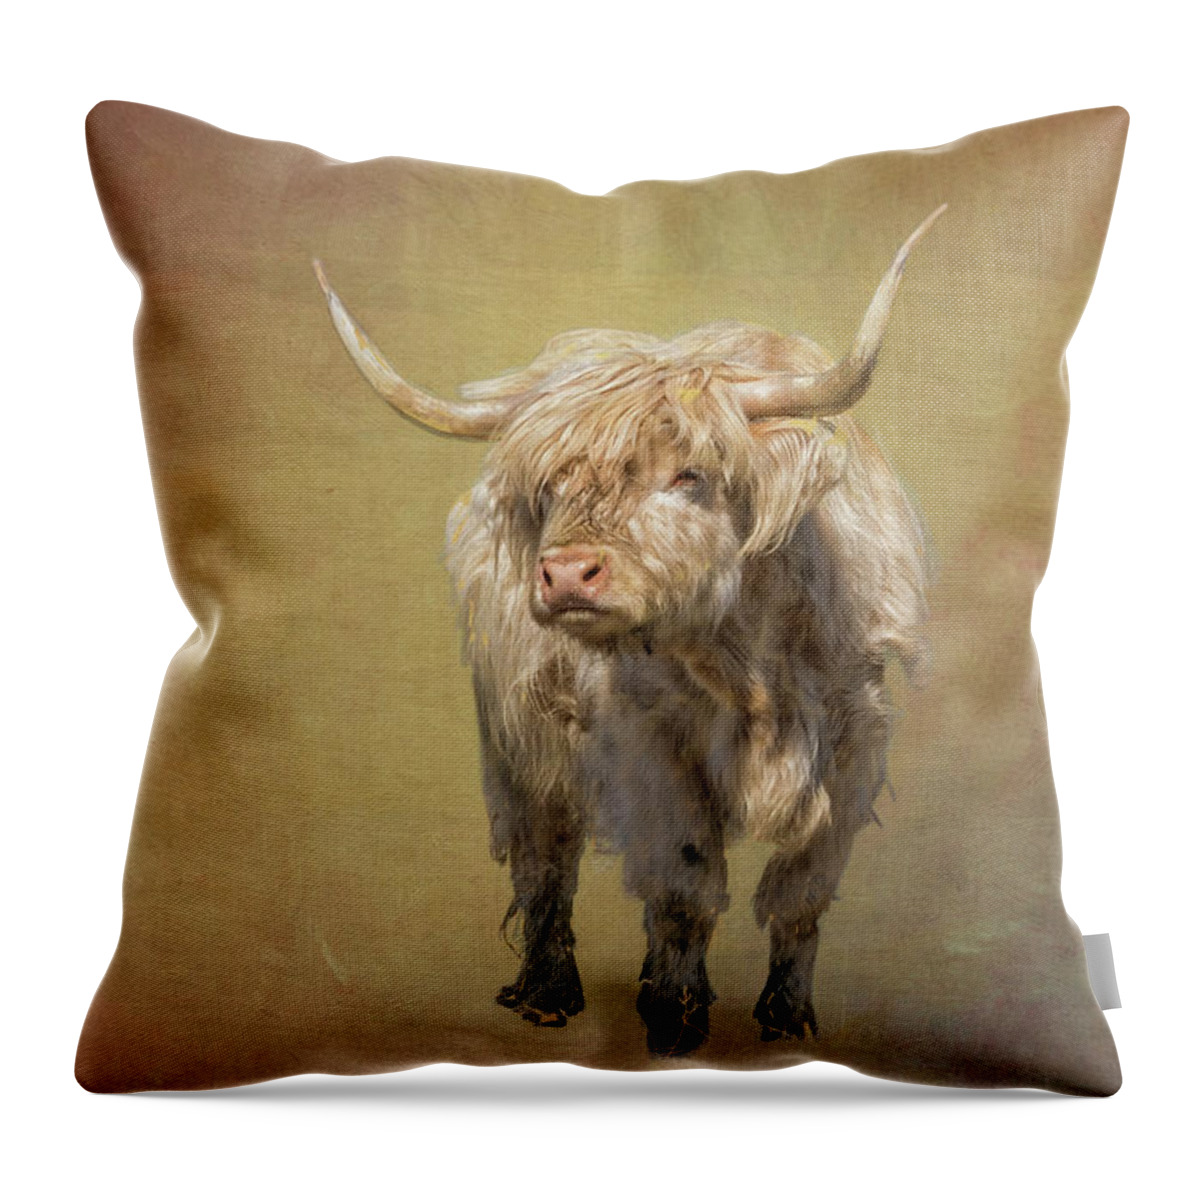 Harrisville New Hampshire. New England Mill Town Throw Pillow featuring the photograph Scottish Highlander by Tom Singleton